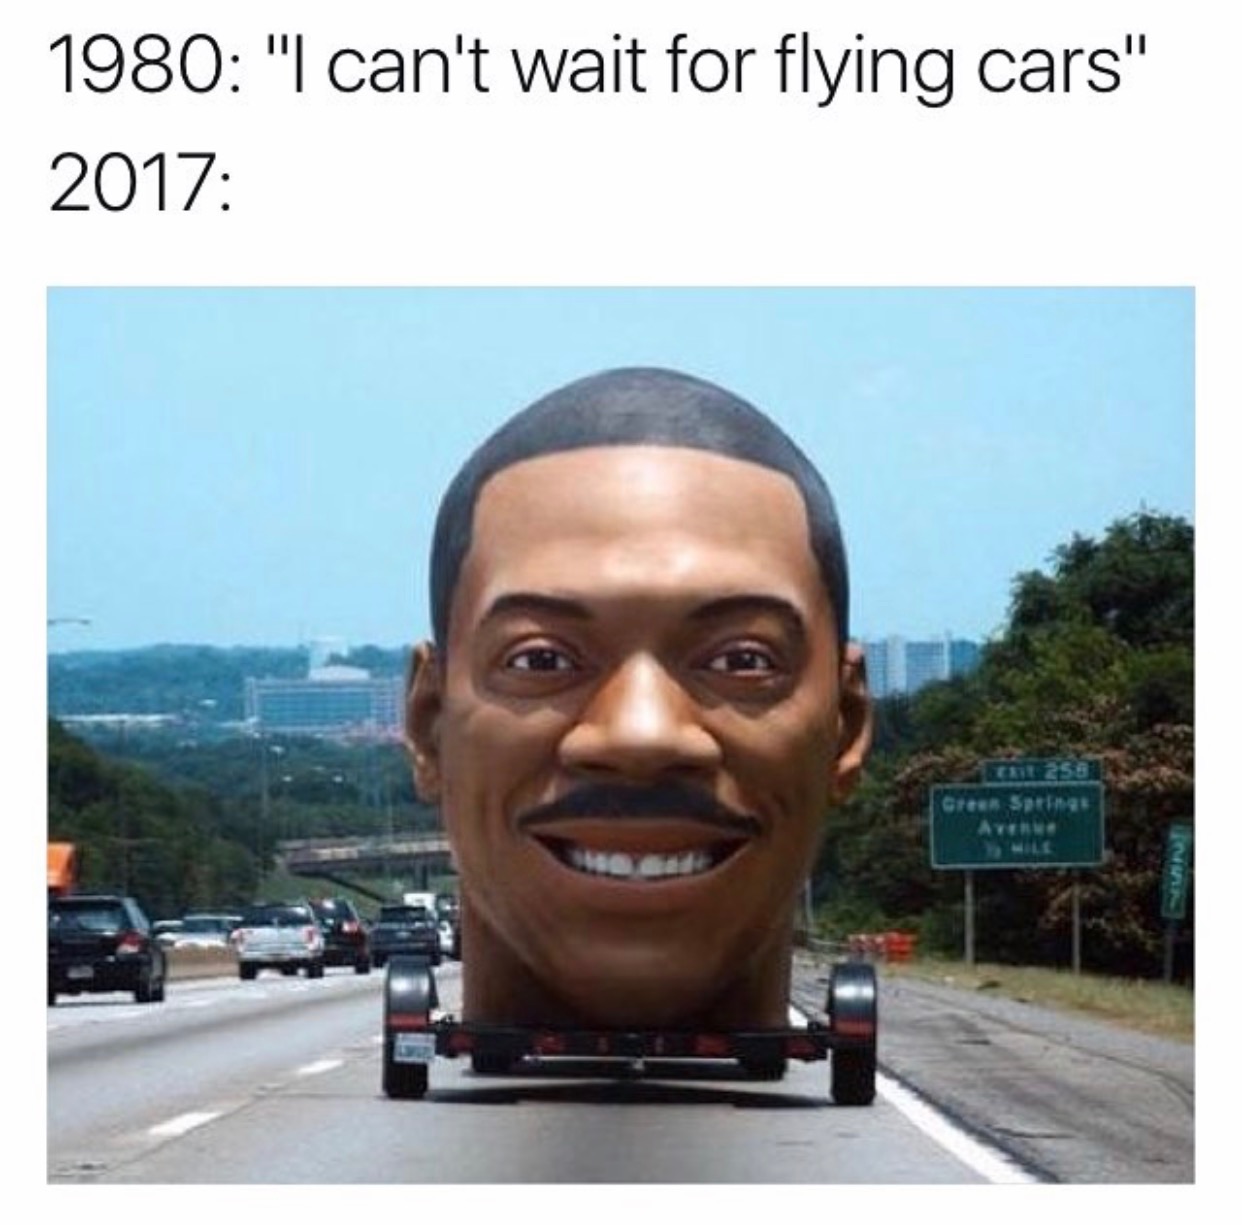 memes - eddie murphy - 1980 "I can't wait for flying cars" 2017